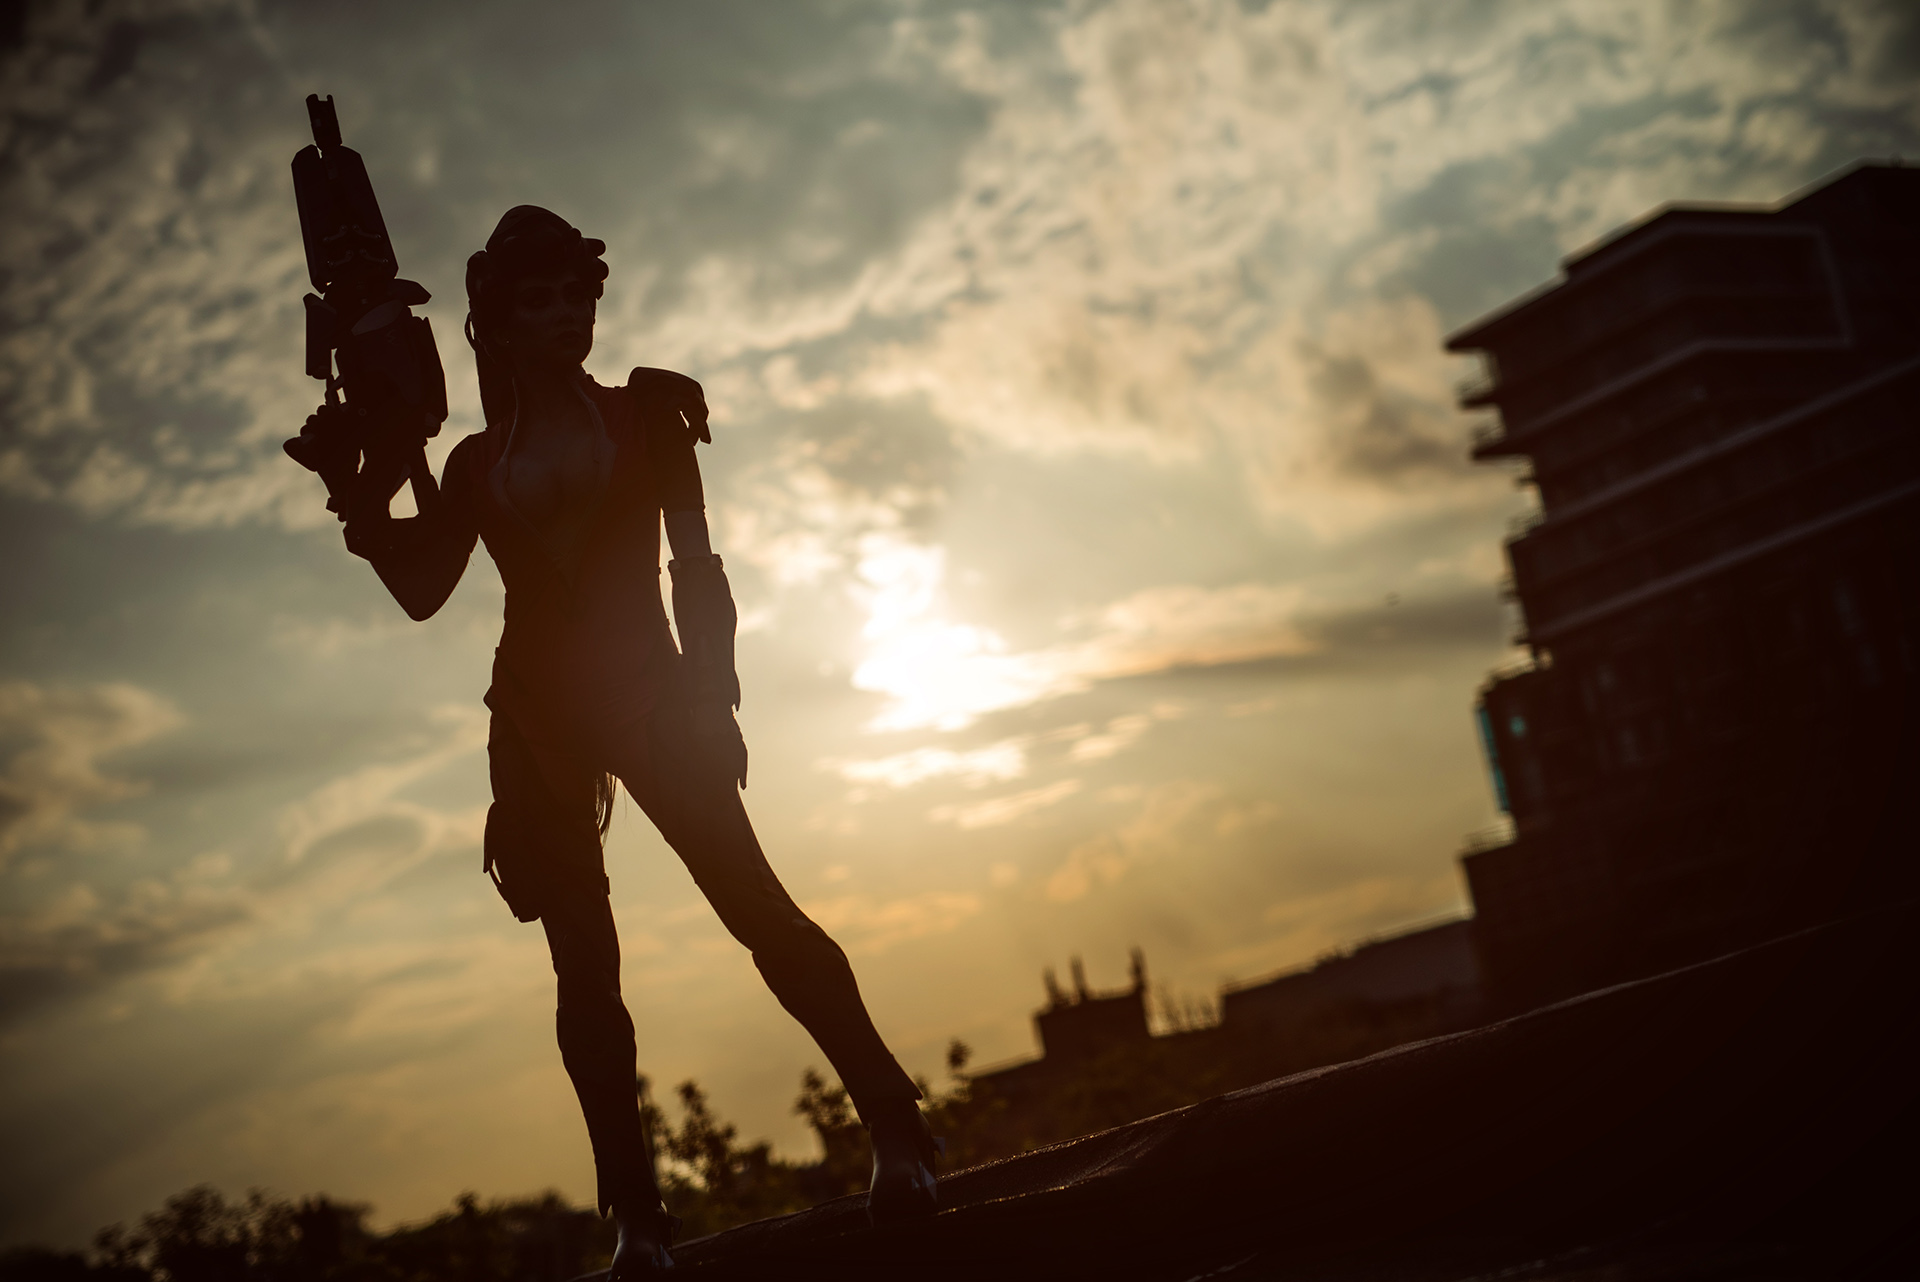 Widowmaker Cosplay Has You In Its Sights